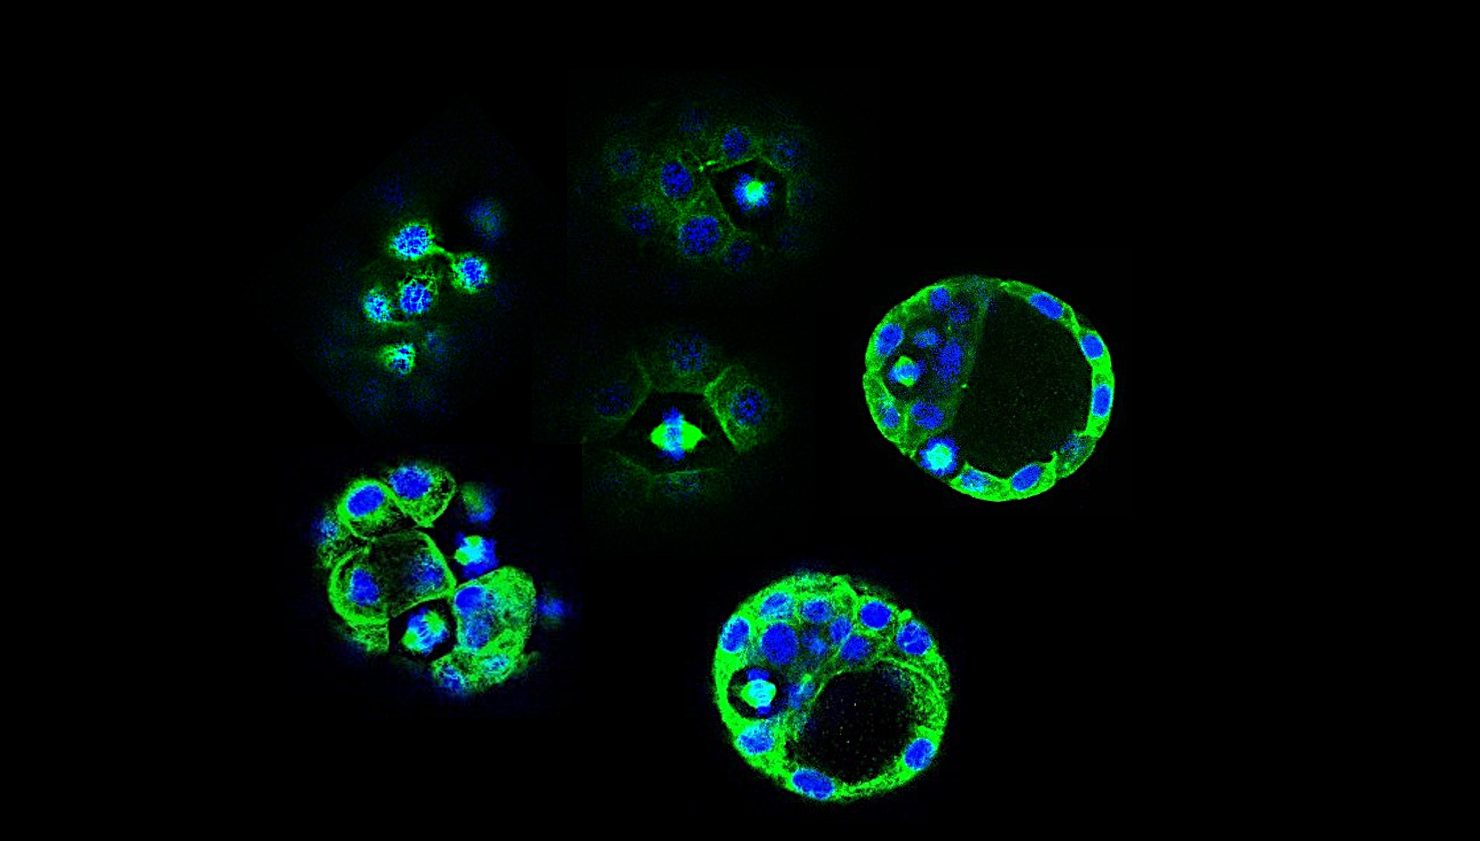 Cell division in the early embrio